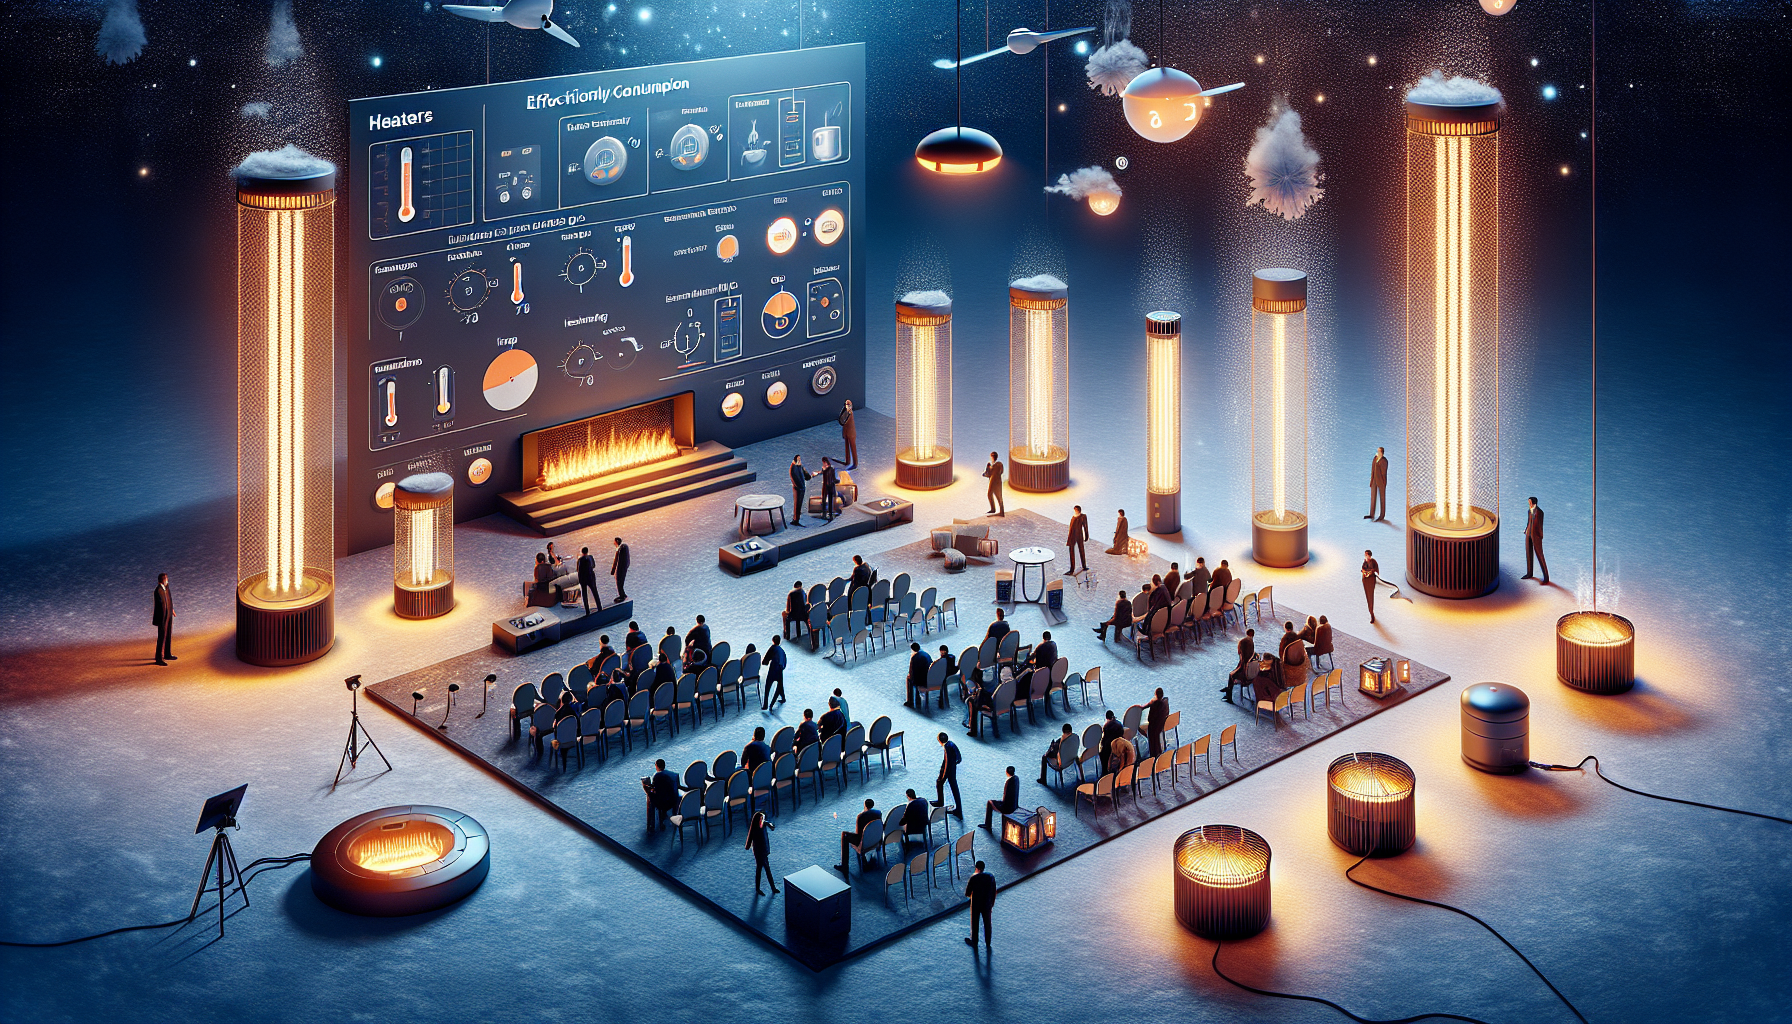 Can space heaters provide warmth in event spaces?